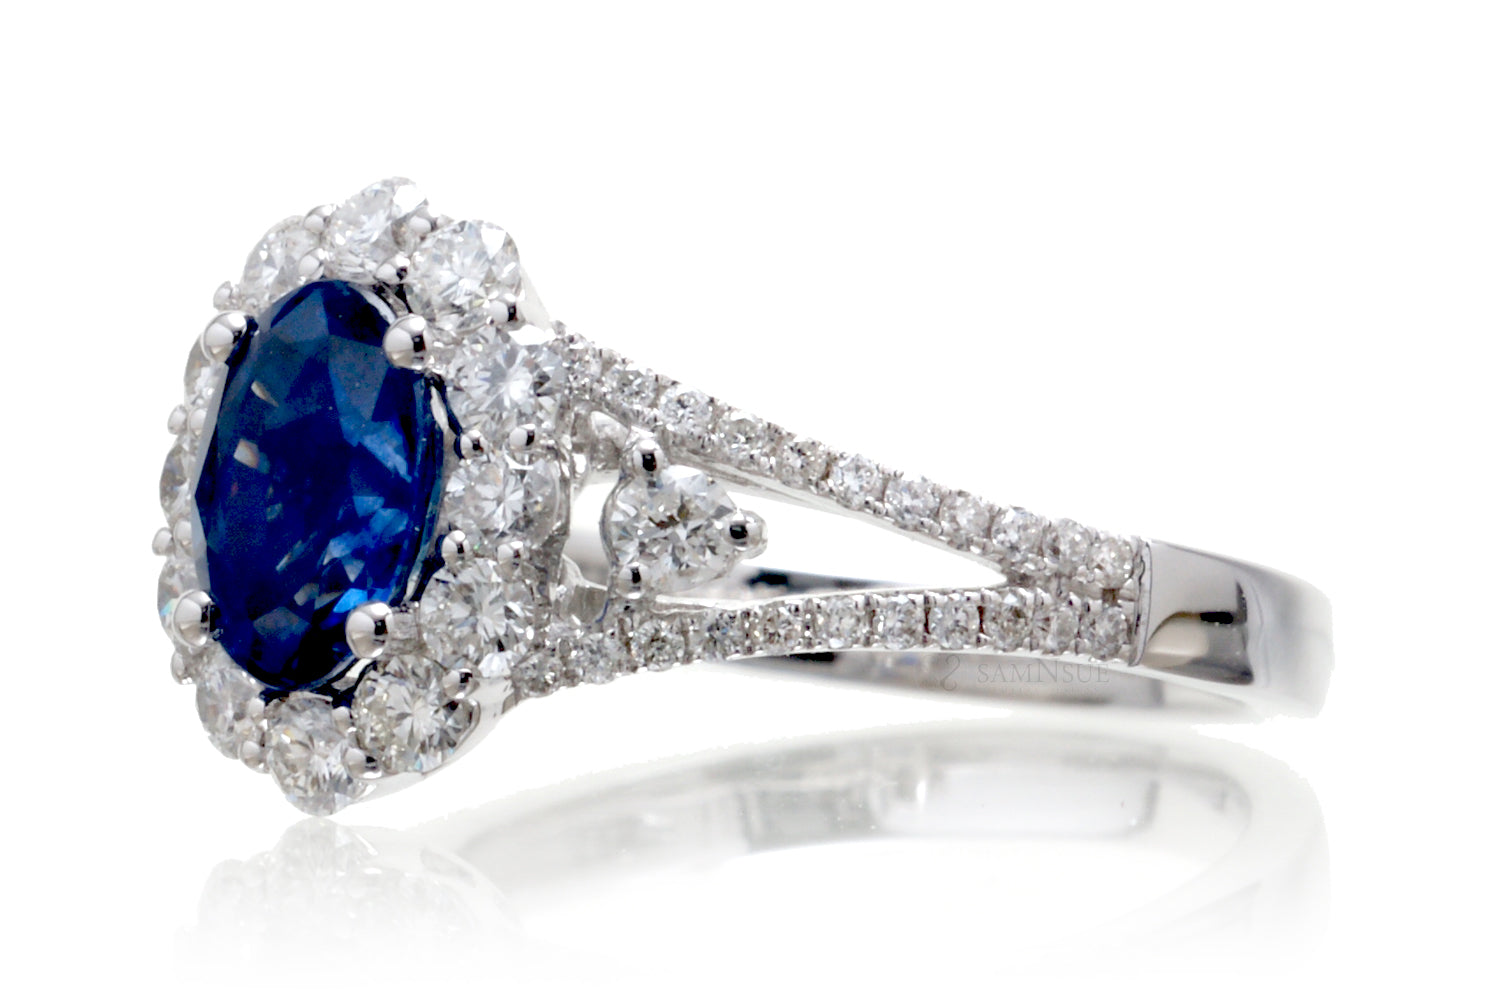 The Chelsea Oval Sapphire